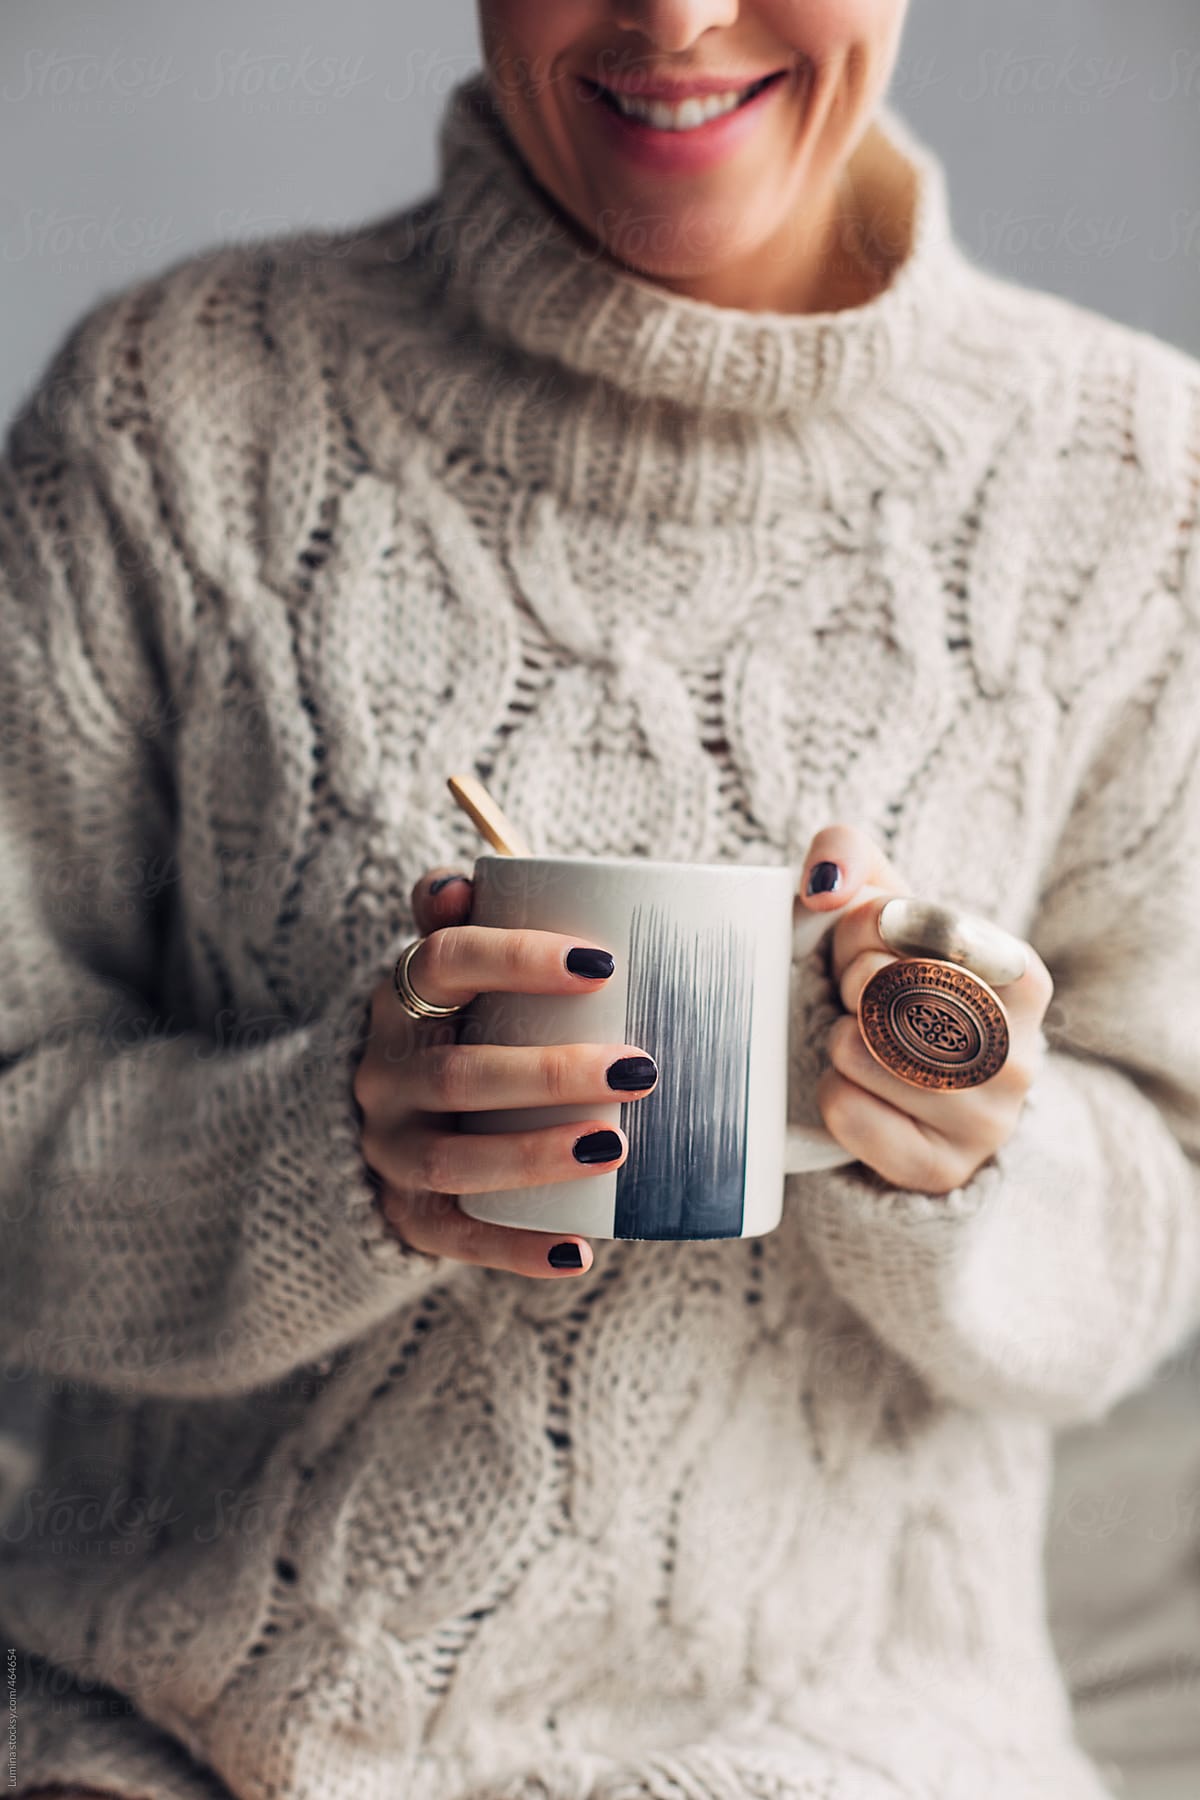 Woman in a Sweater Holding Hot Coffee